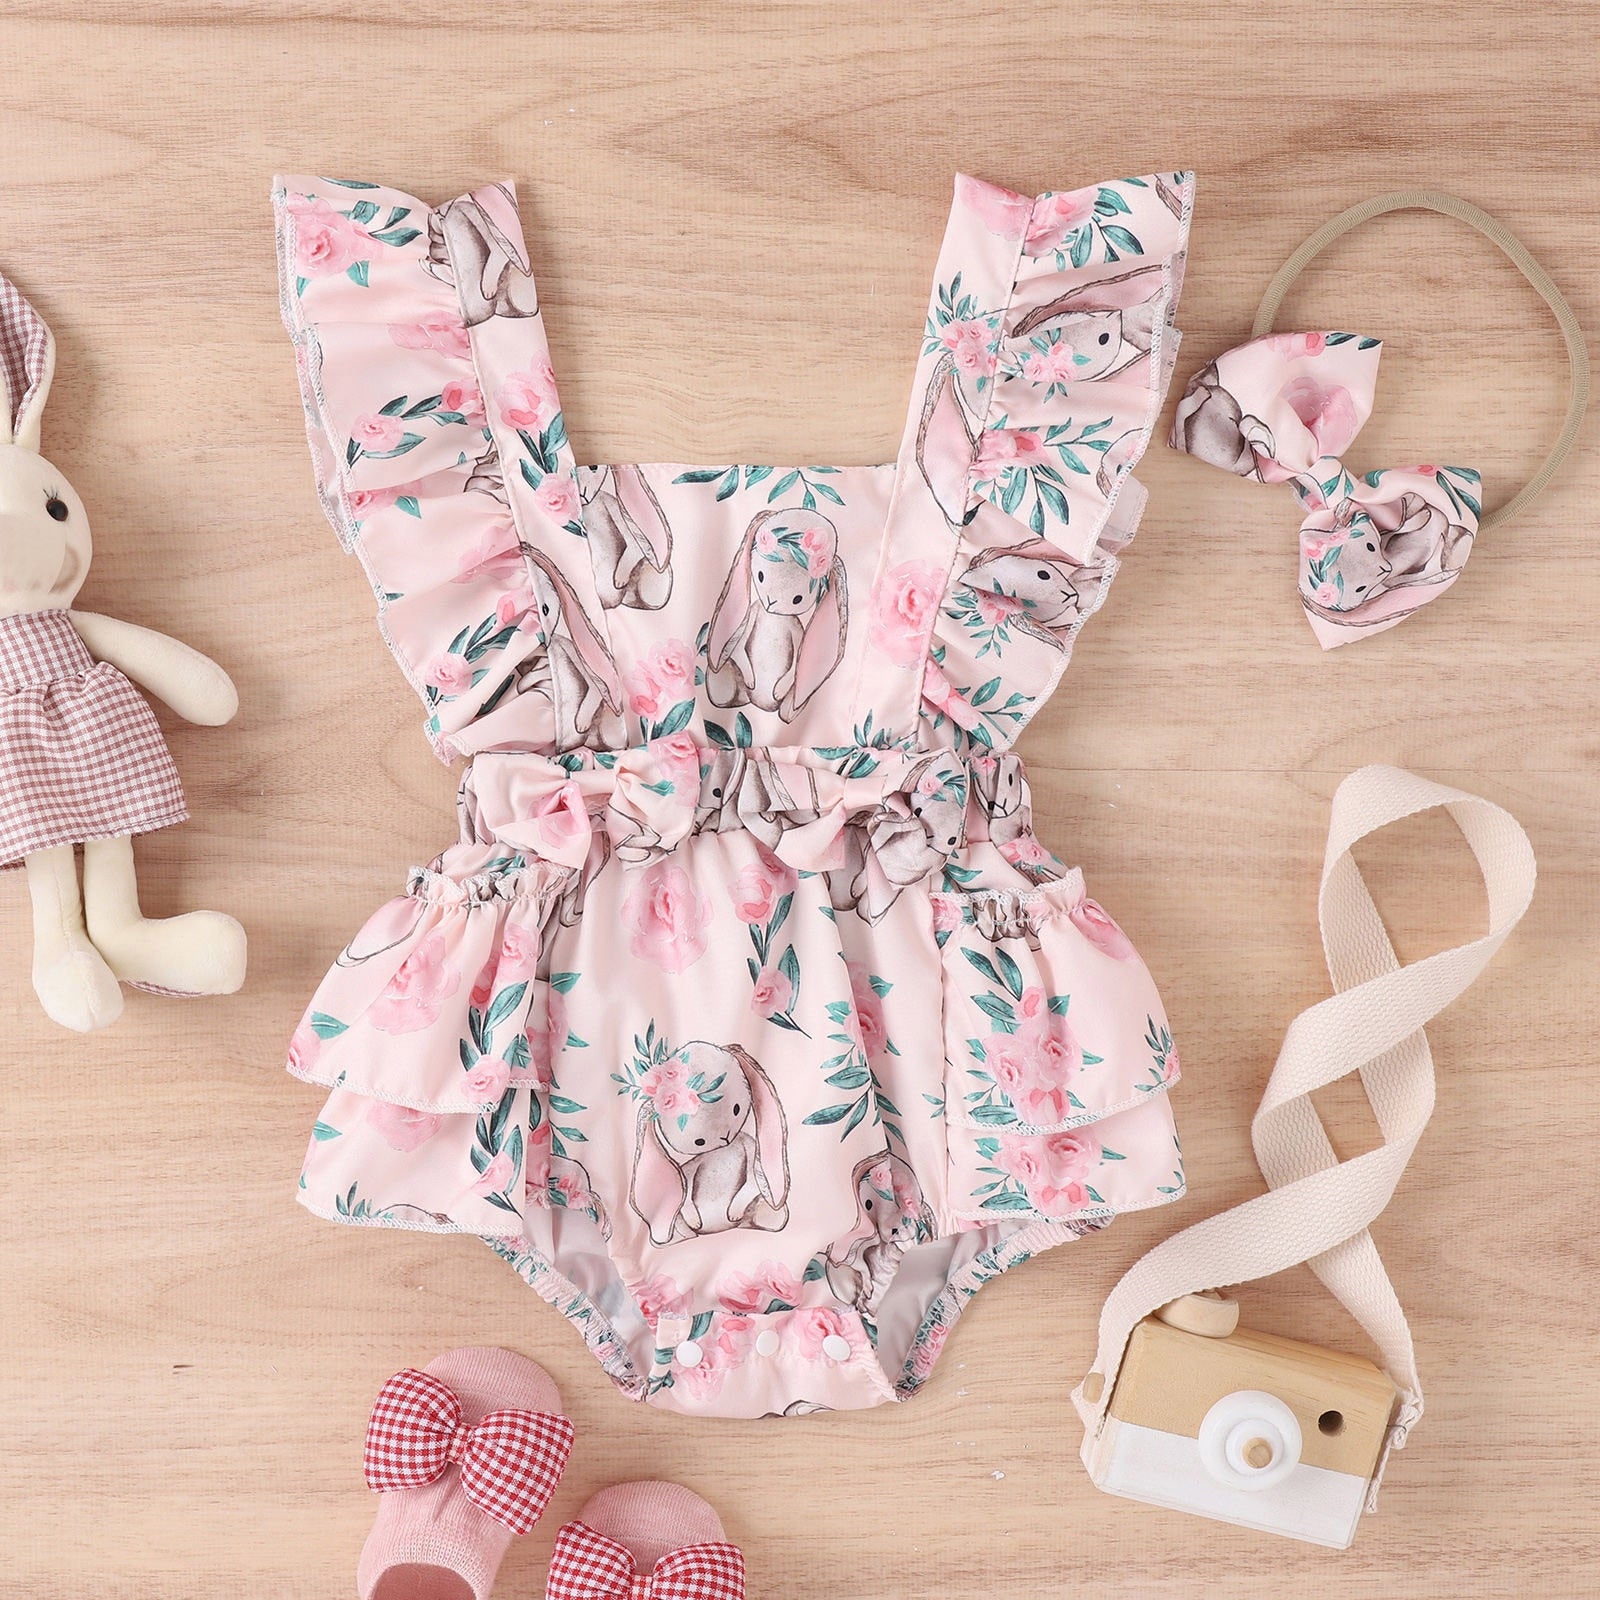 Adorable Newborn Baby Girls Easter Outfits - Ruffle Fly Sleeve Rabbit Romper Jumpsuits